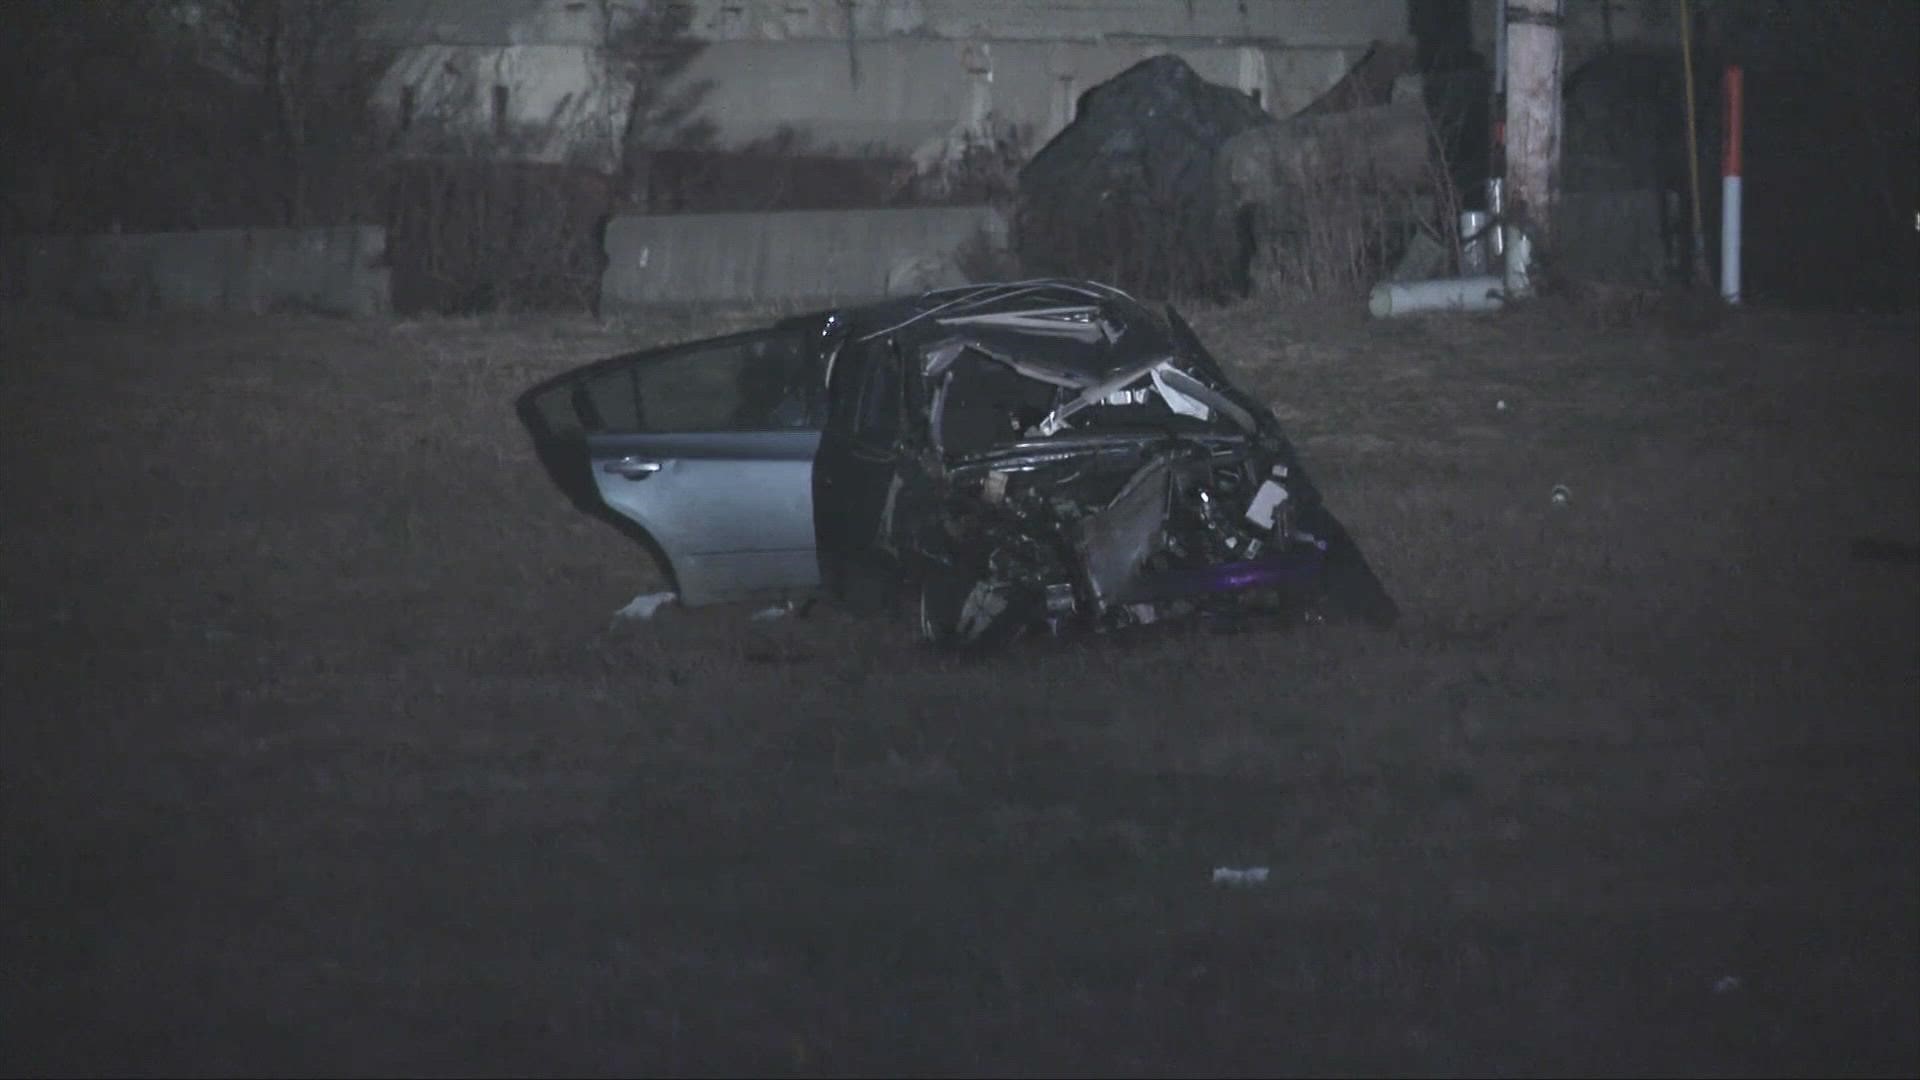 The crash happened just after 12:40 a.m. on Frank Road, west of Interstate 71. The driver was taken to Grant Hospital in critical condition.